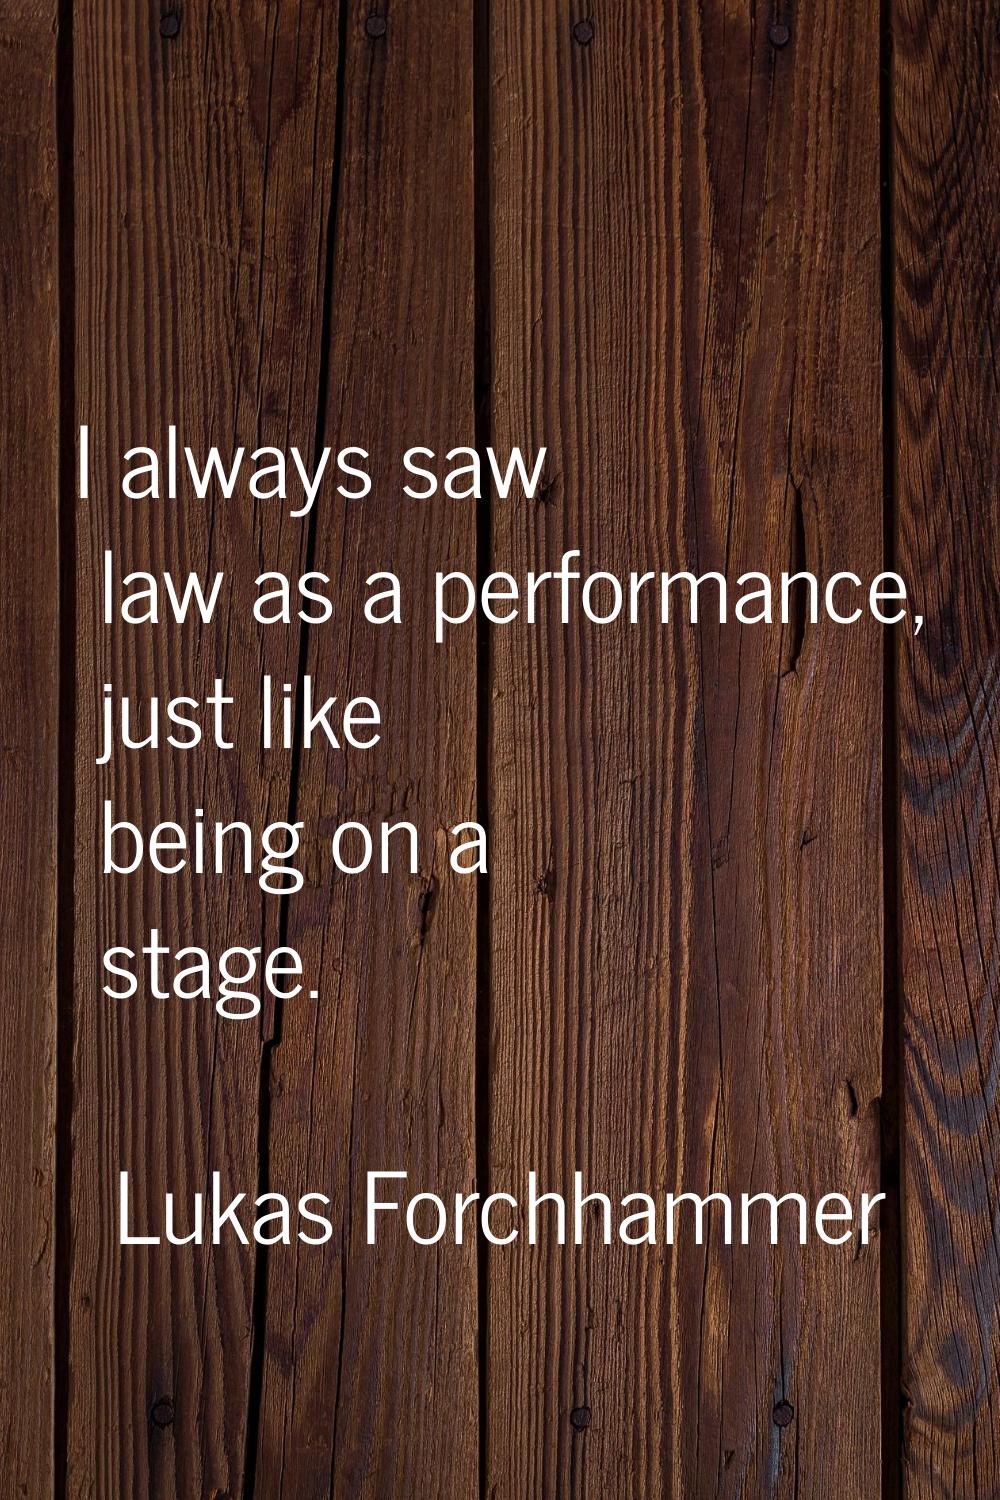 I always saw law as a performance, just like being on a stage.